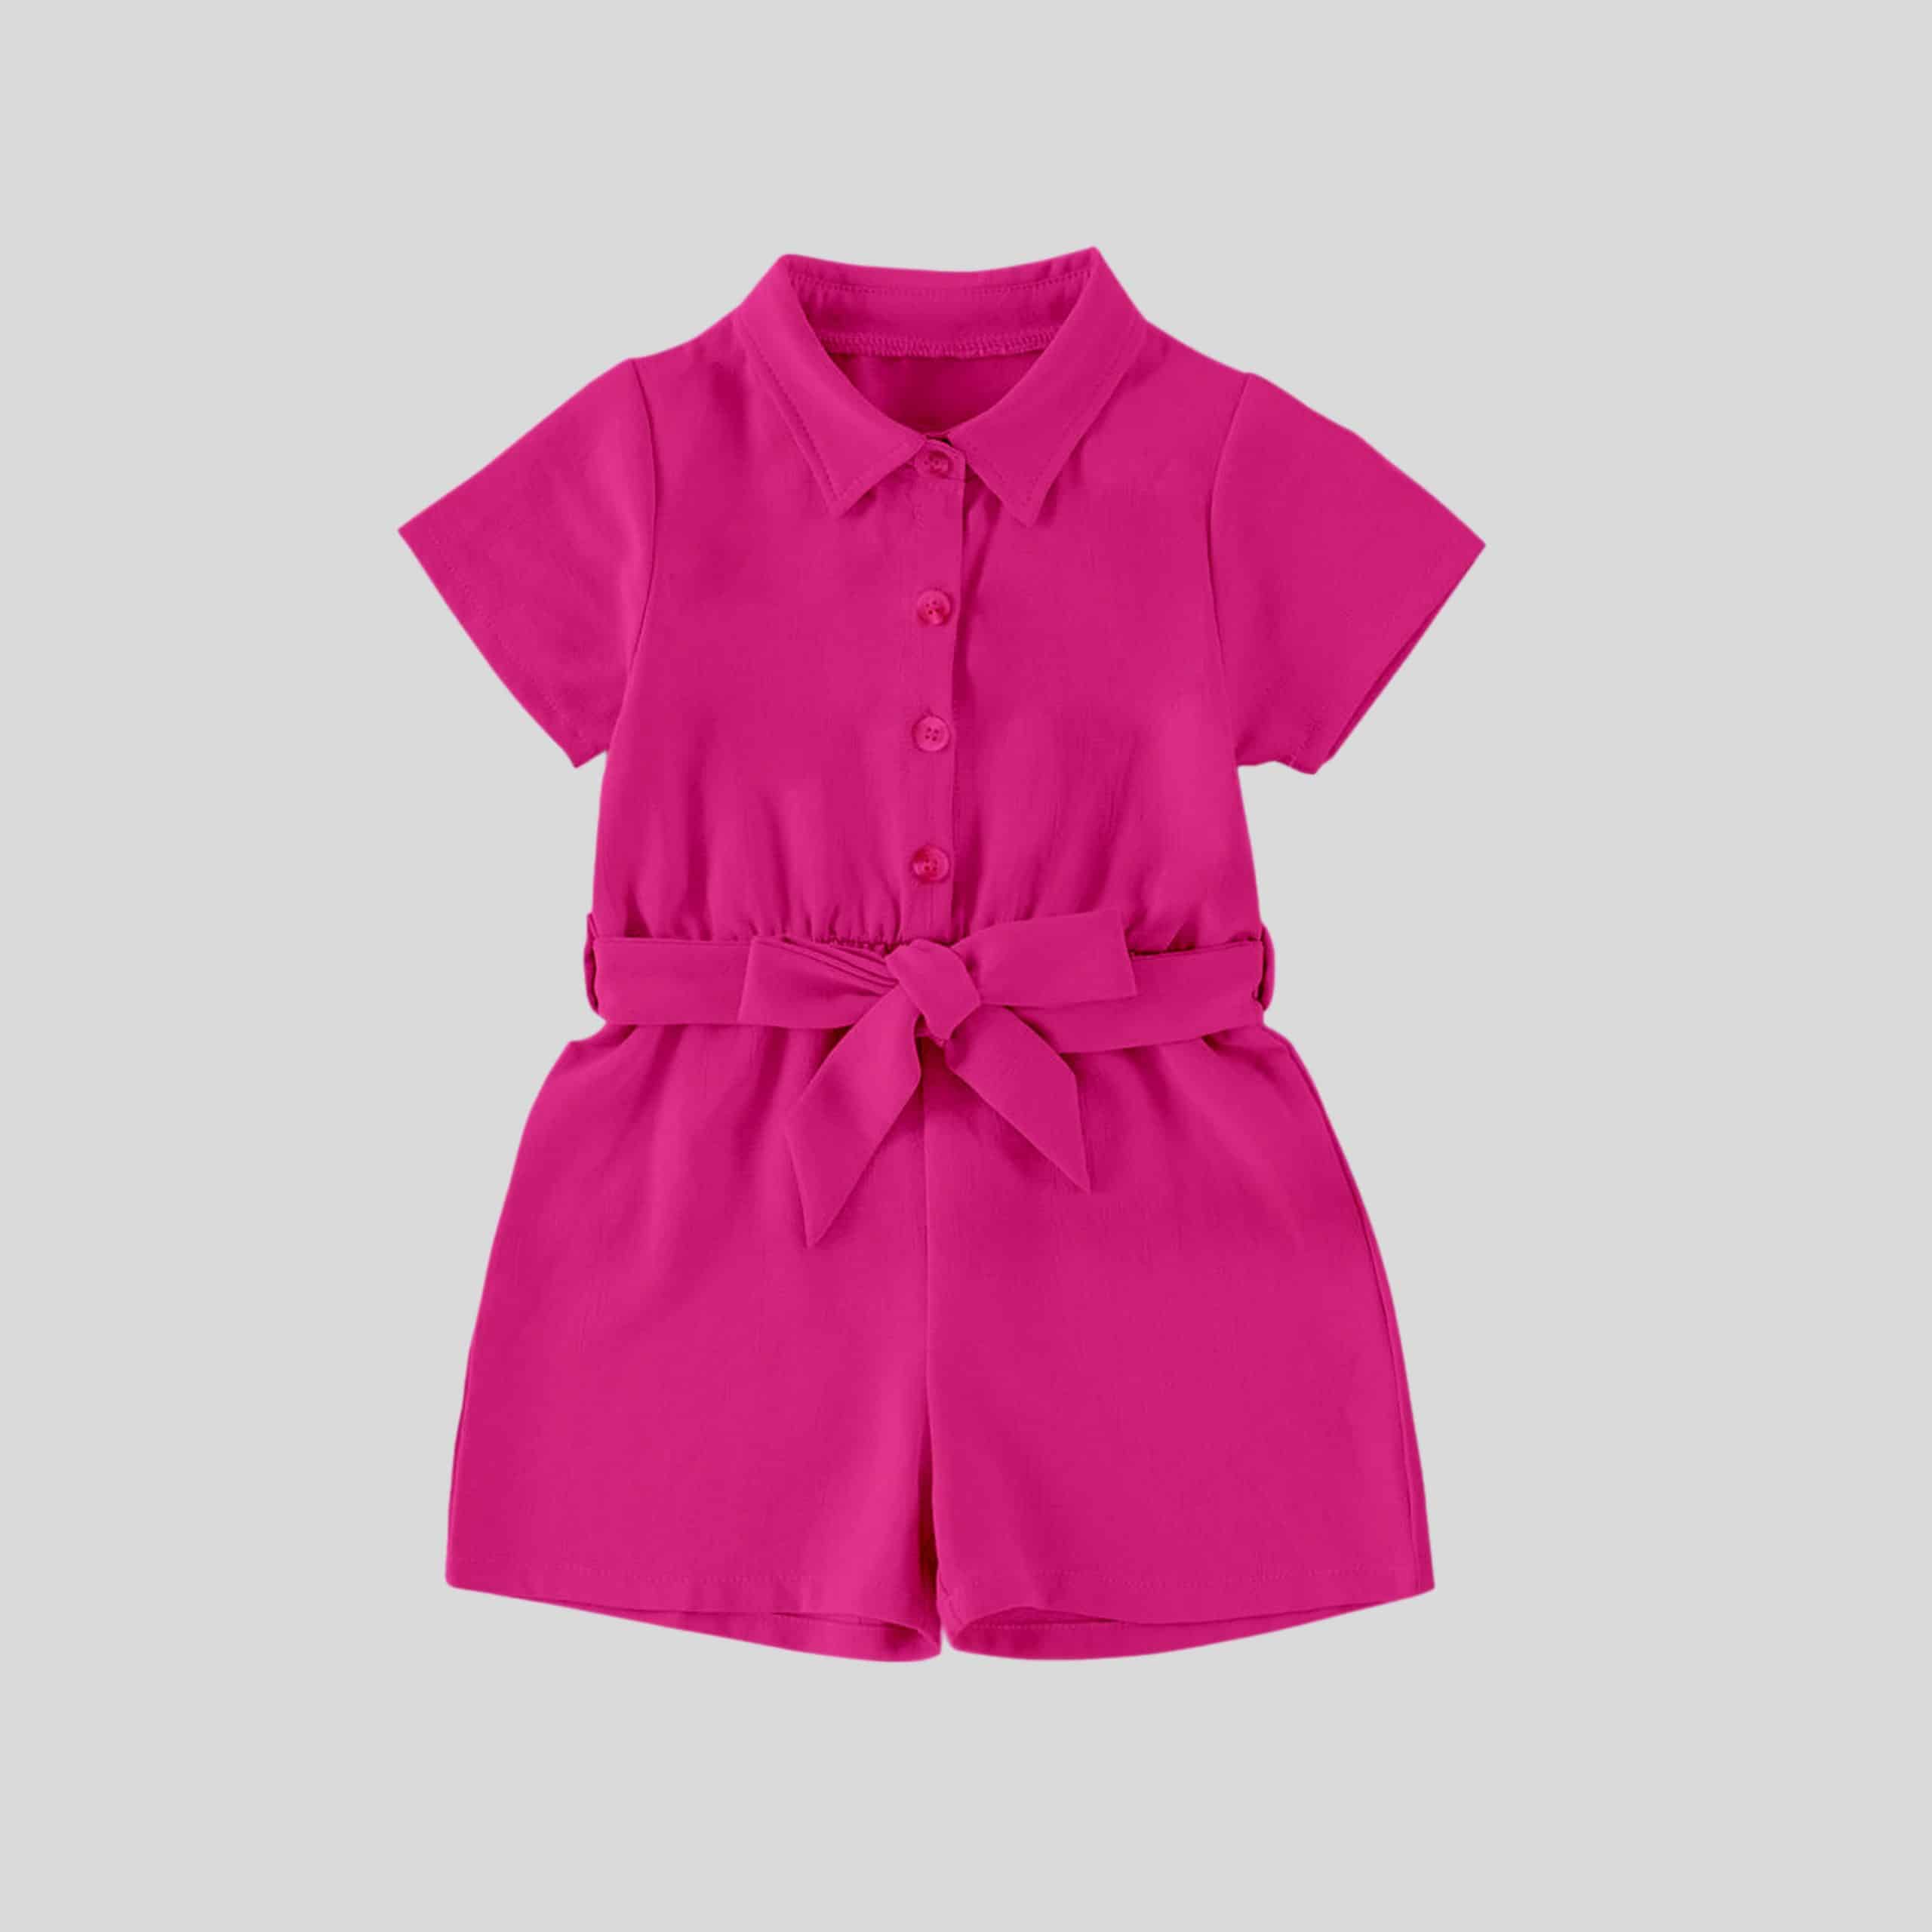 Girls ruby pink unicorn jumpsuit with bow tie - RKFCW158